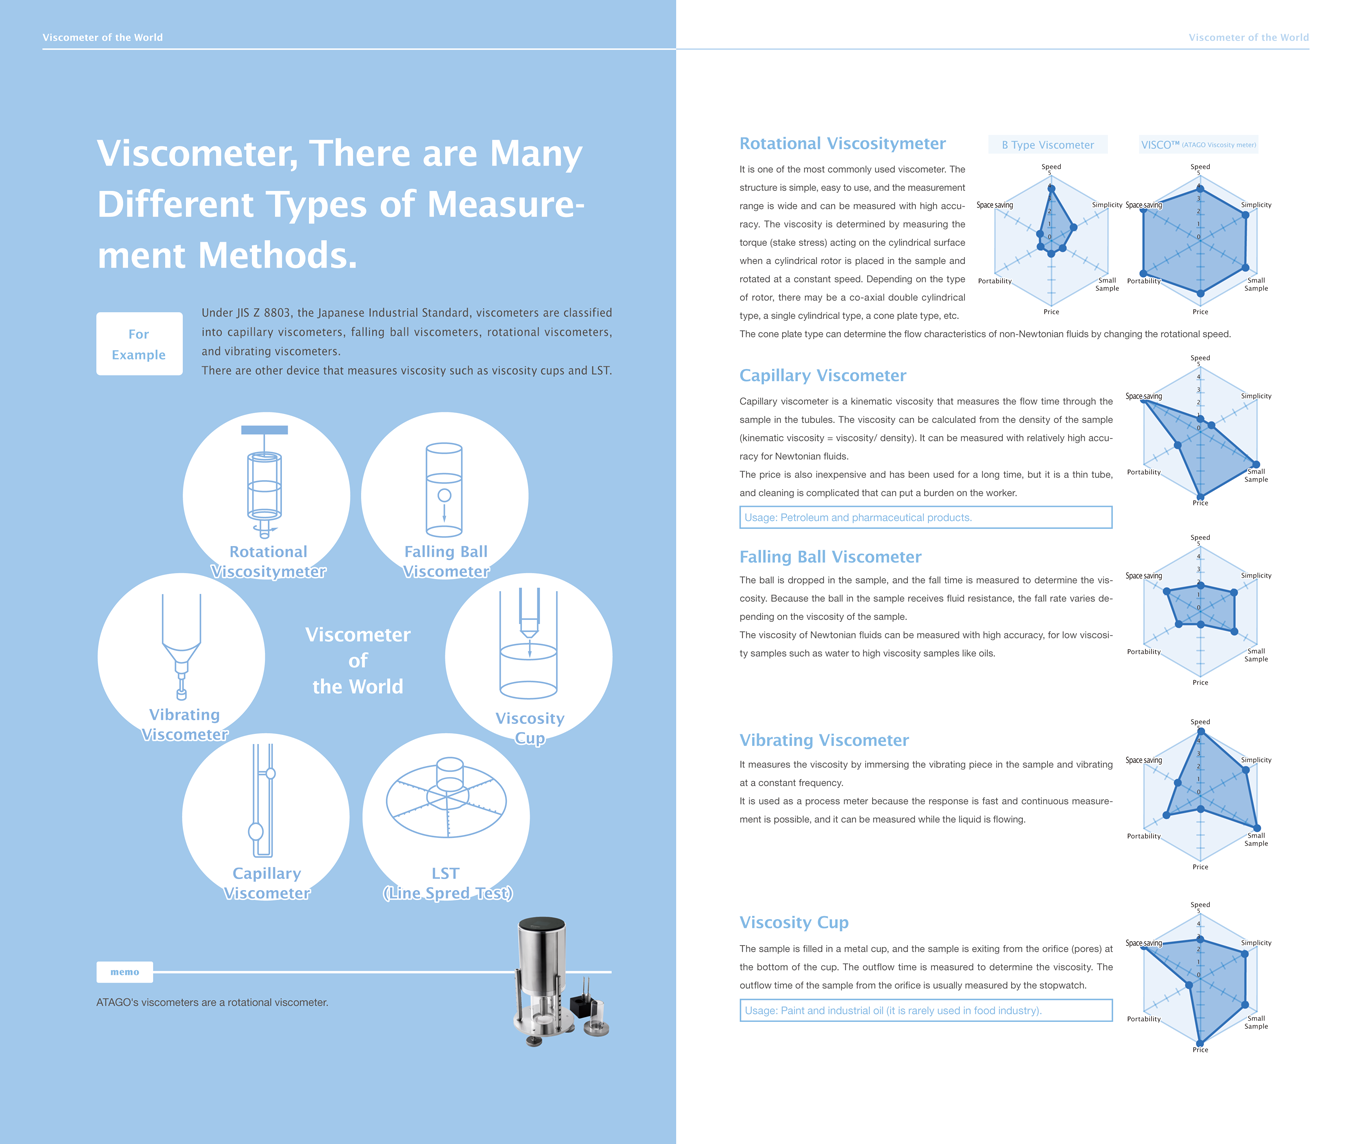 Viscometer, There are Many Different Types of Measurement Methods.